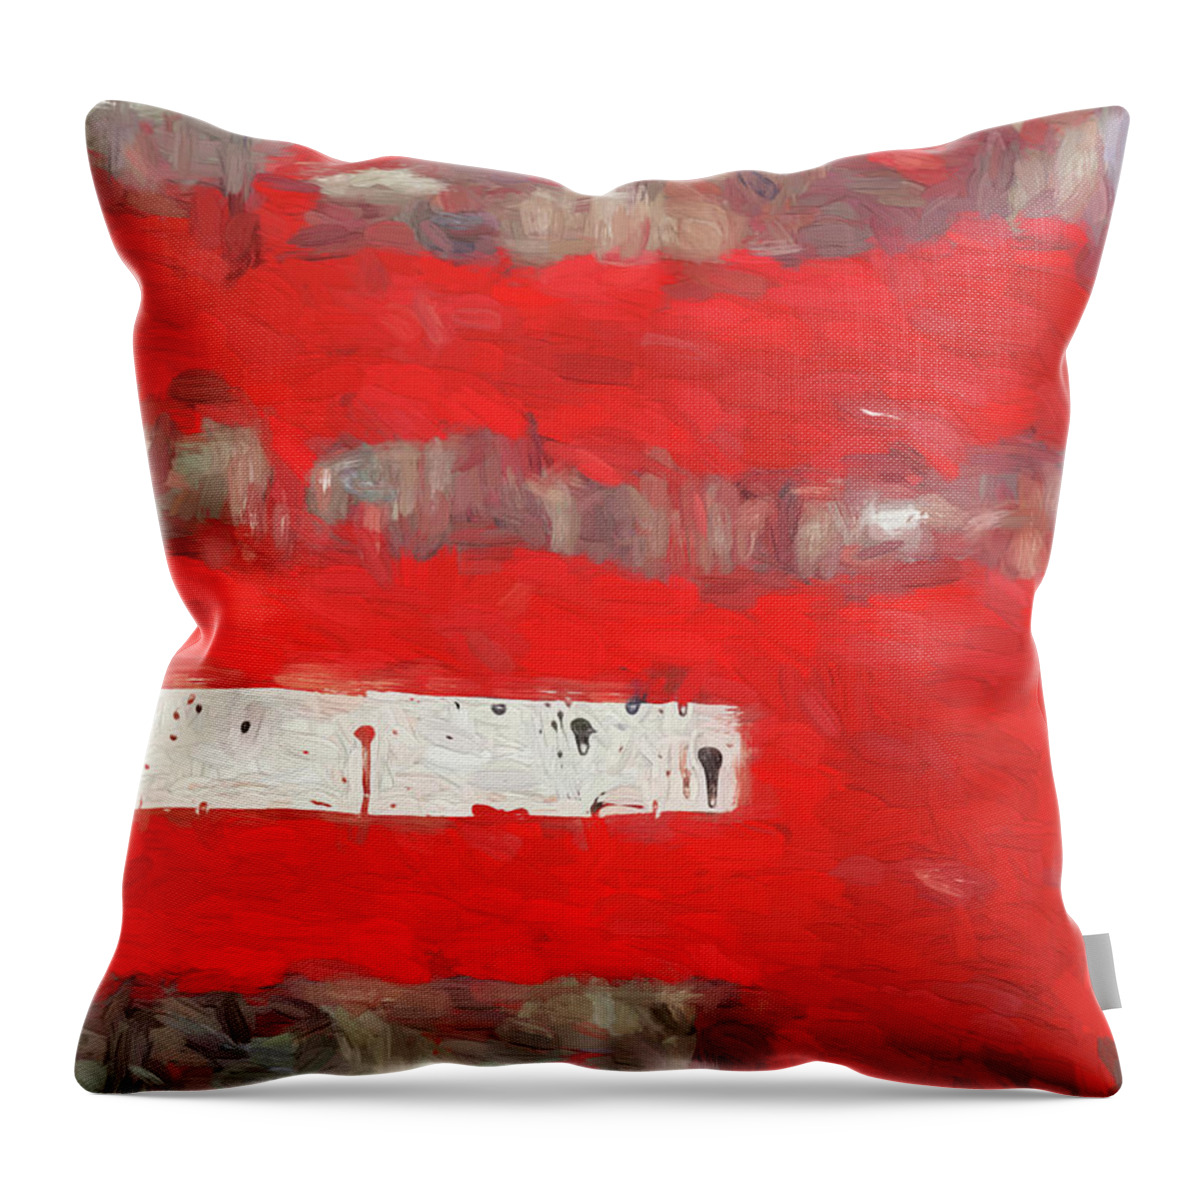 Abstract Left Side Throw Pillow featuring the photograph Abstract Left by Rich Franco